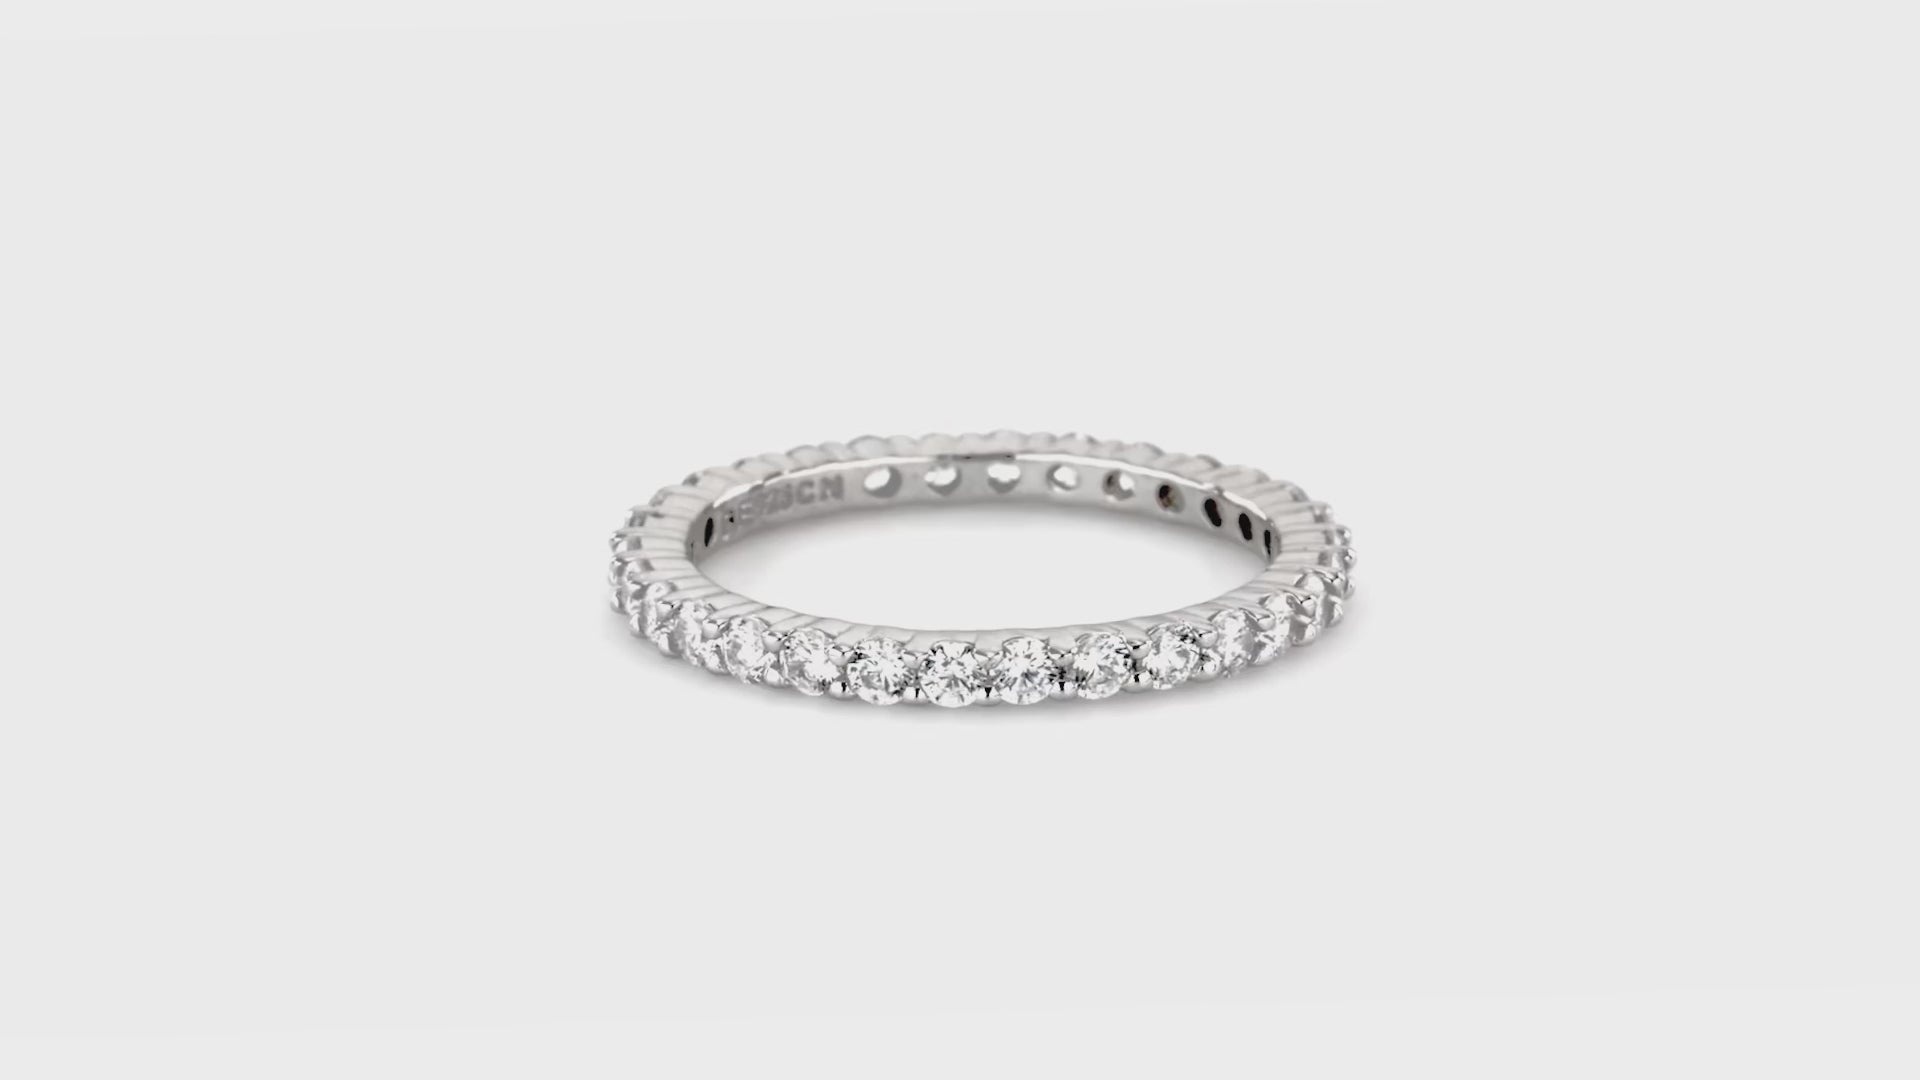 Video Contains CZ Stackable Ring Set in Sterling Silver. Style Number VR635-02